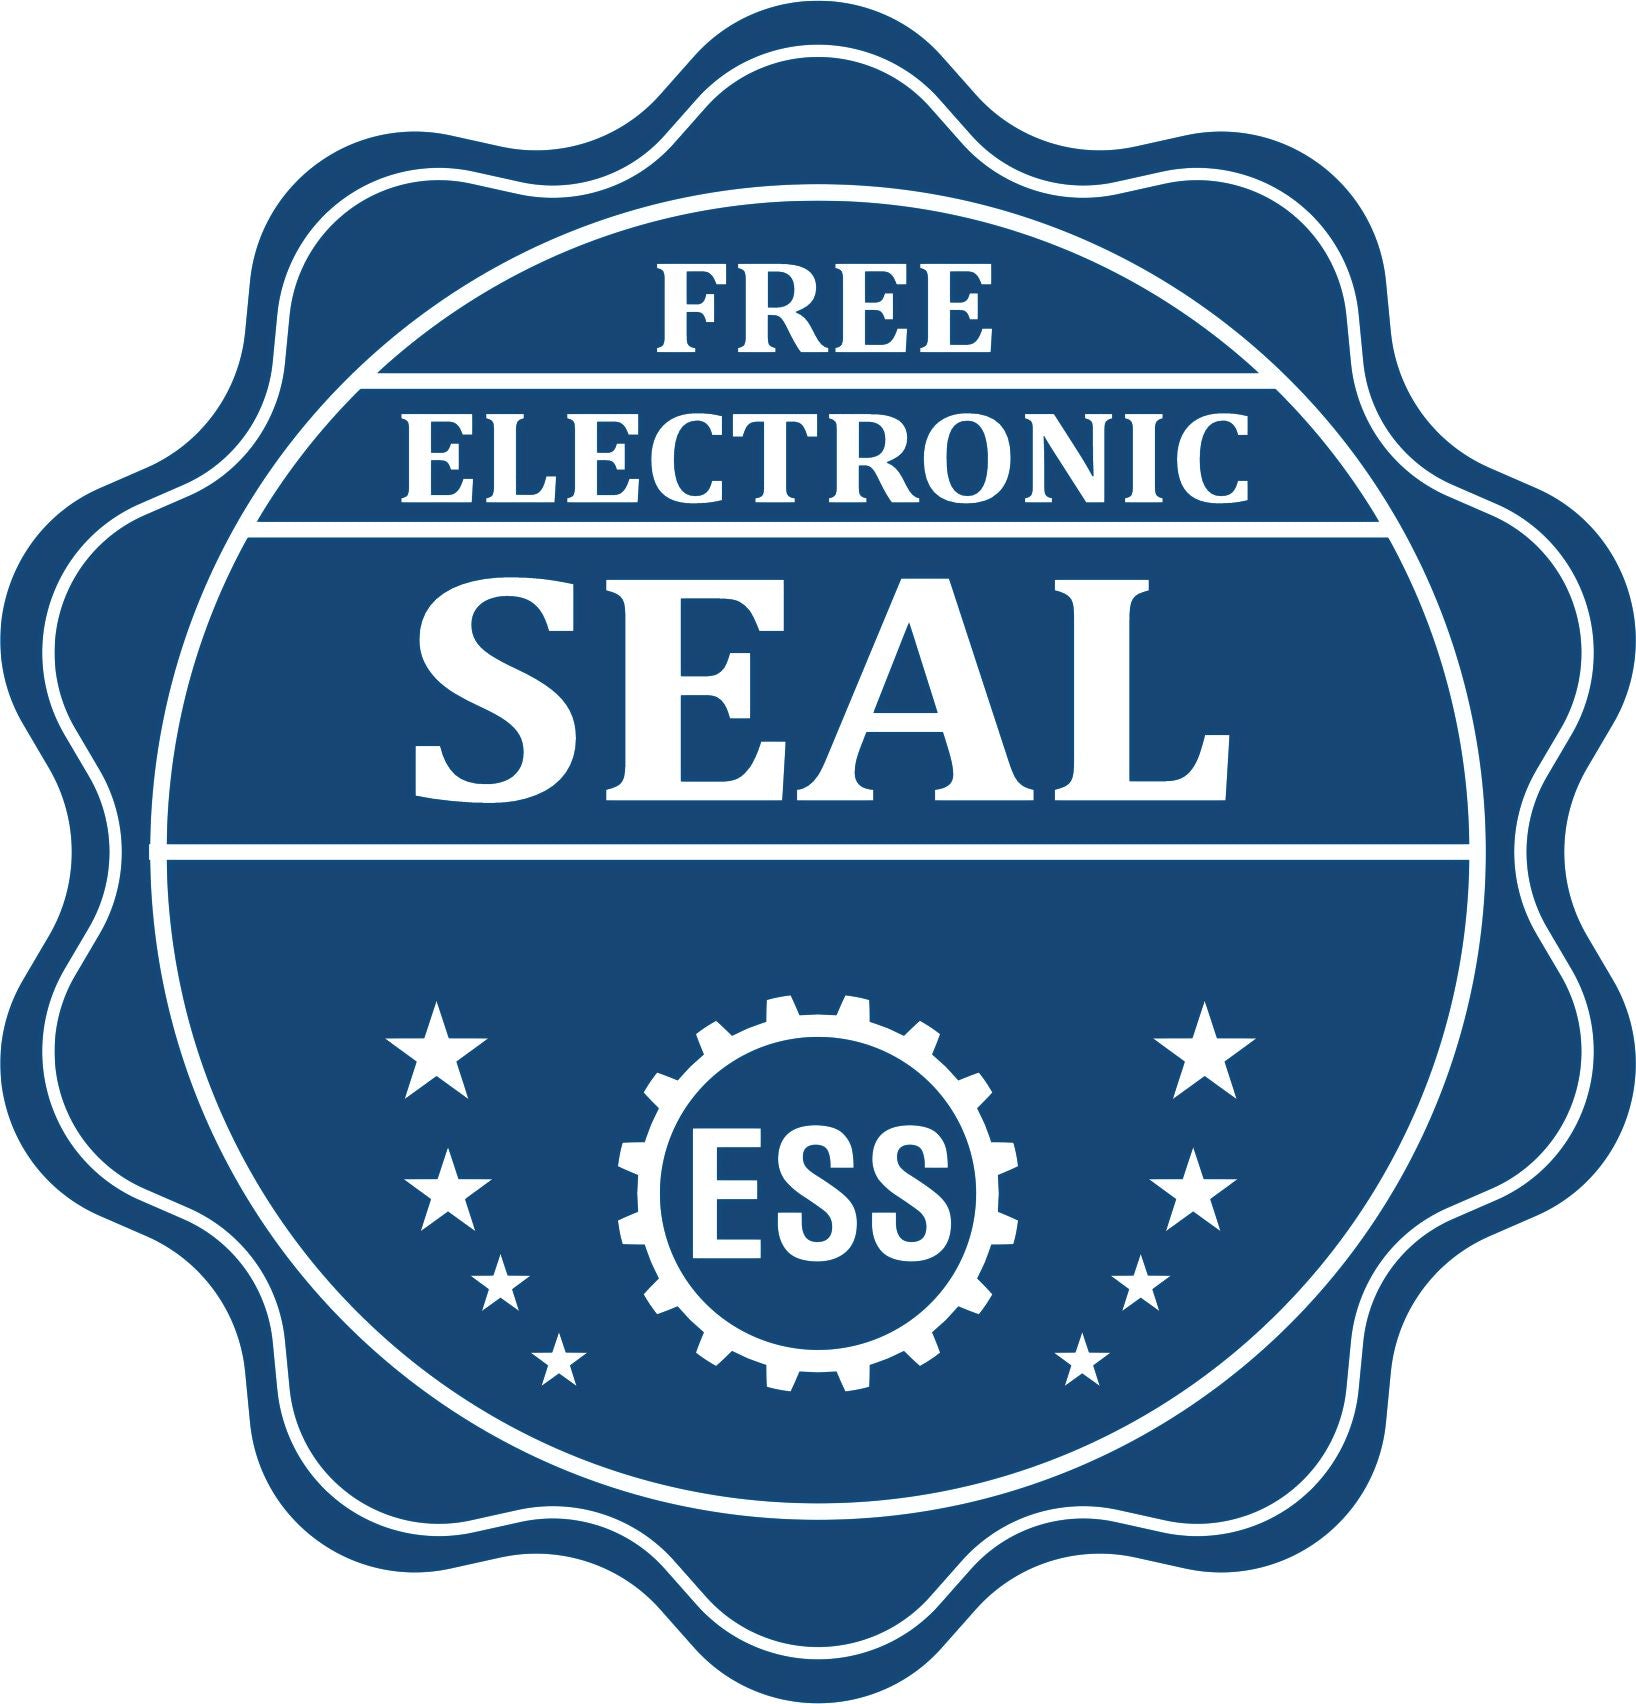 A badge showing a free electronic seal for the Long Reach Texas PE Seal with stars and the ESS gear on the emblem.